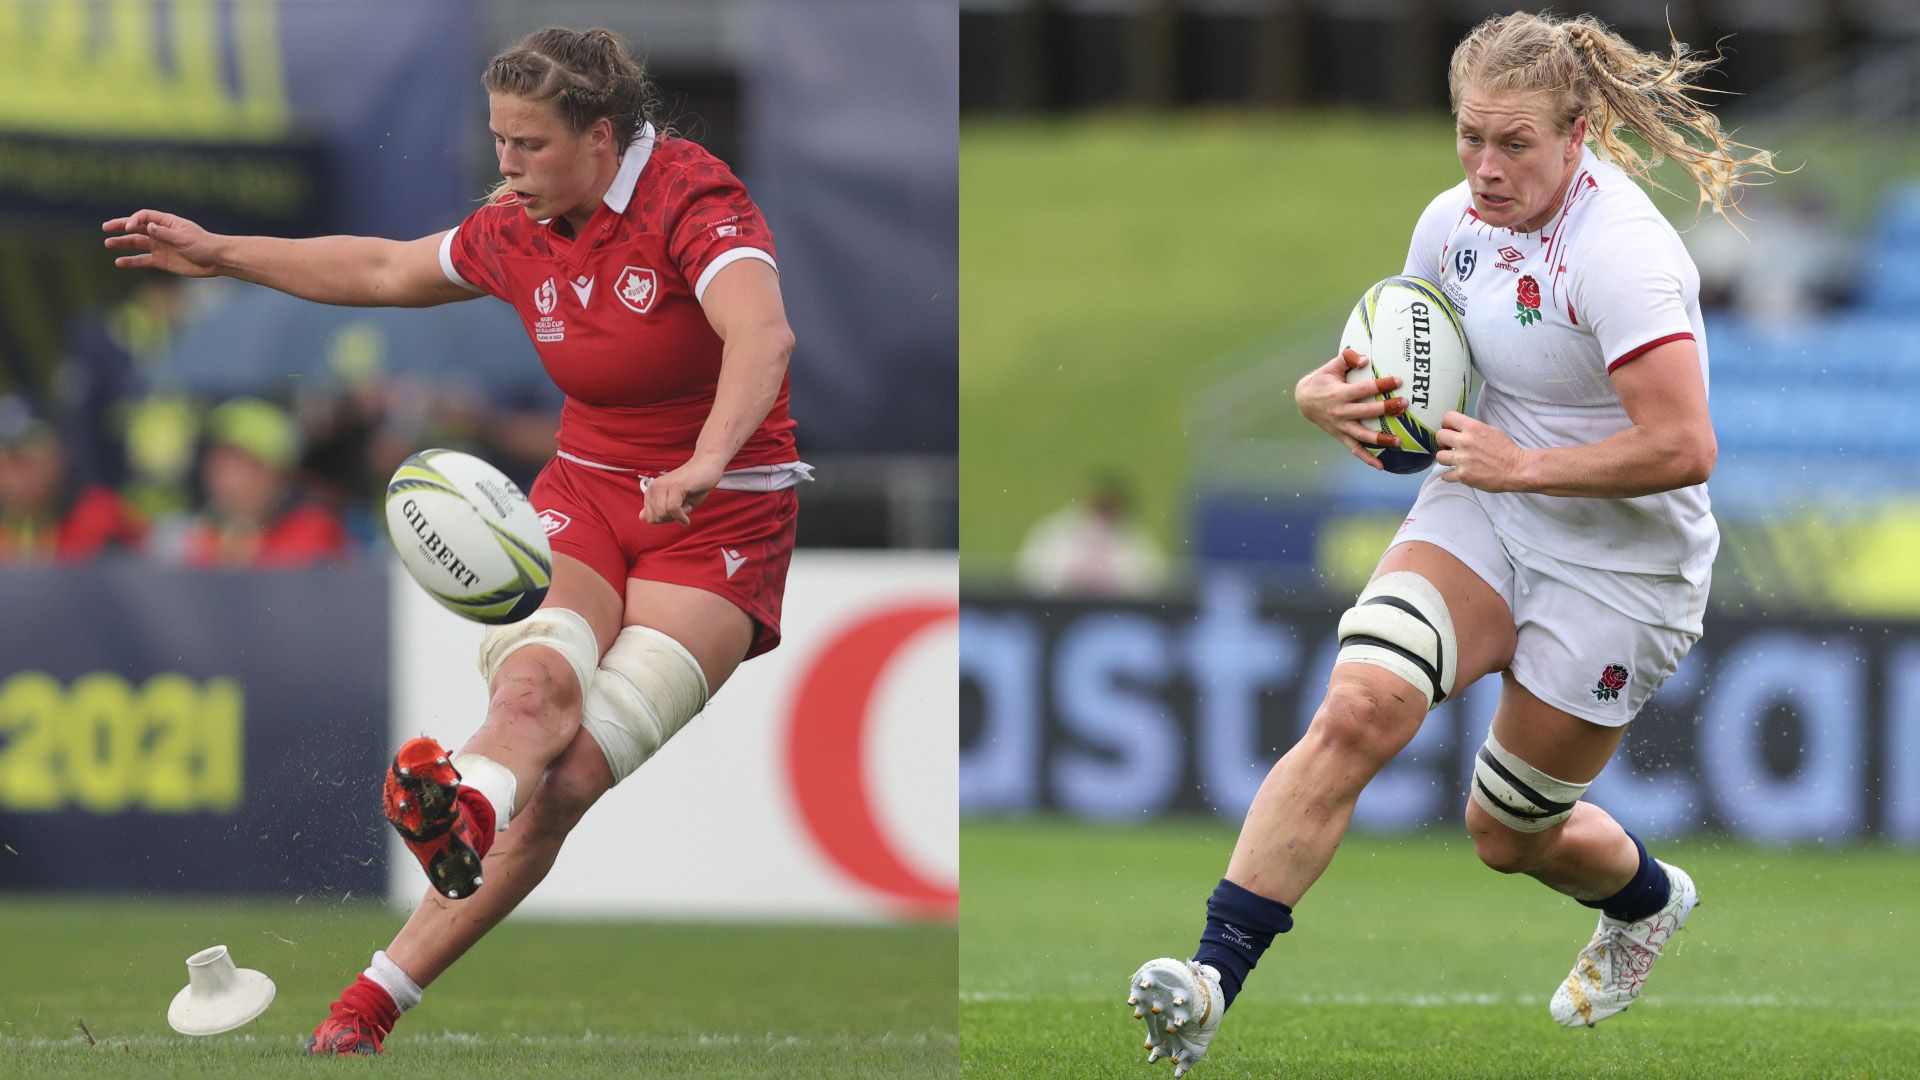 Canada Vs England Live Stream How To Watch Womens Rugby World Cup 2021 Semi Final Online 